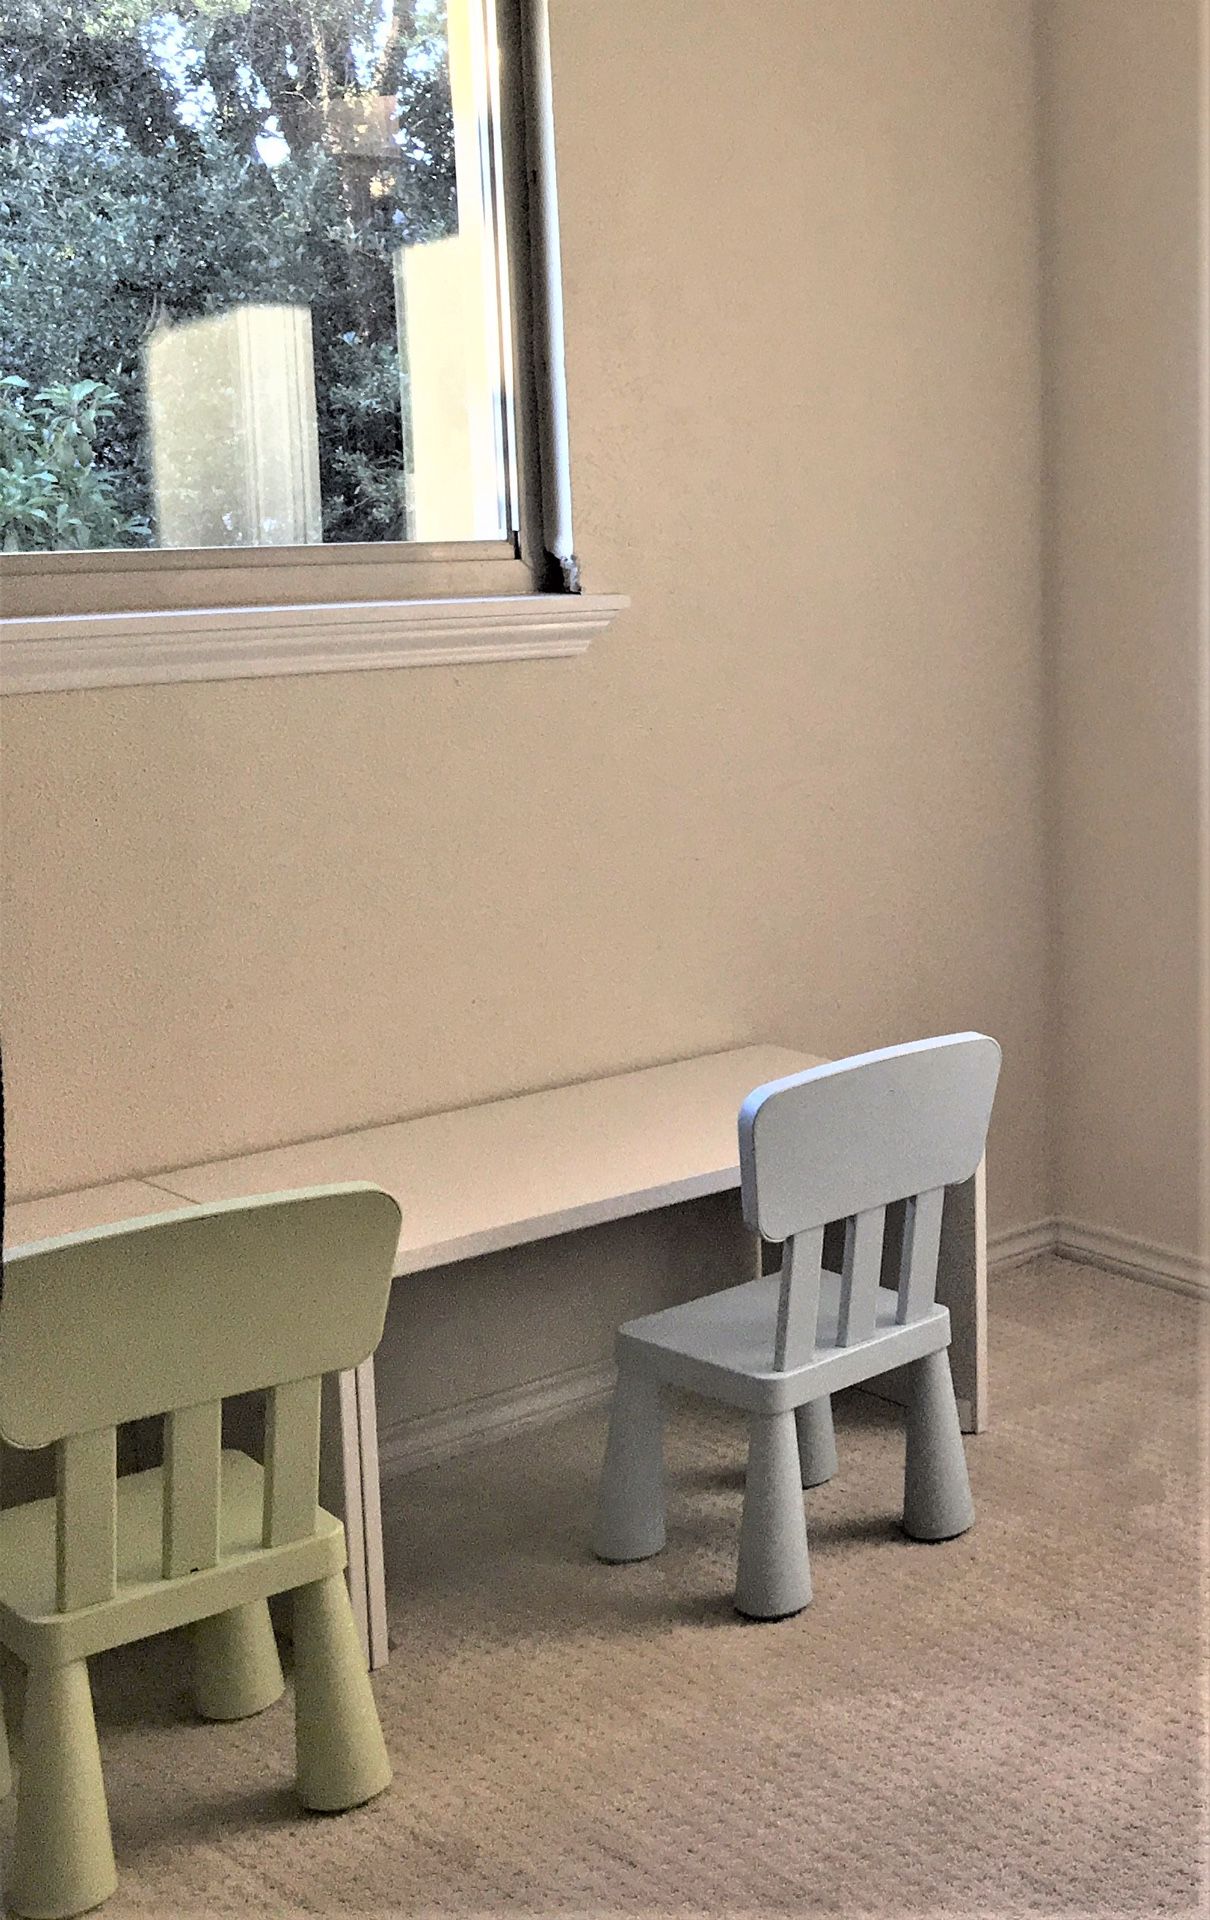 Kids tables and chairs